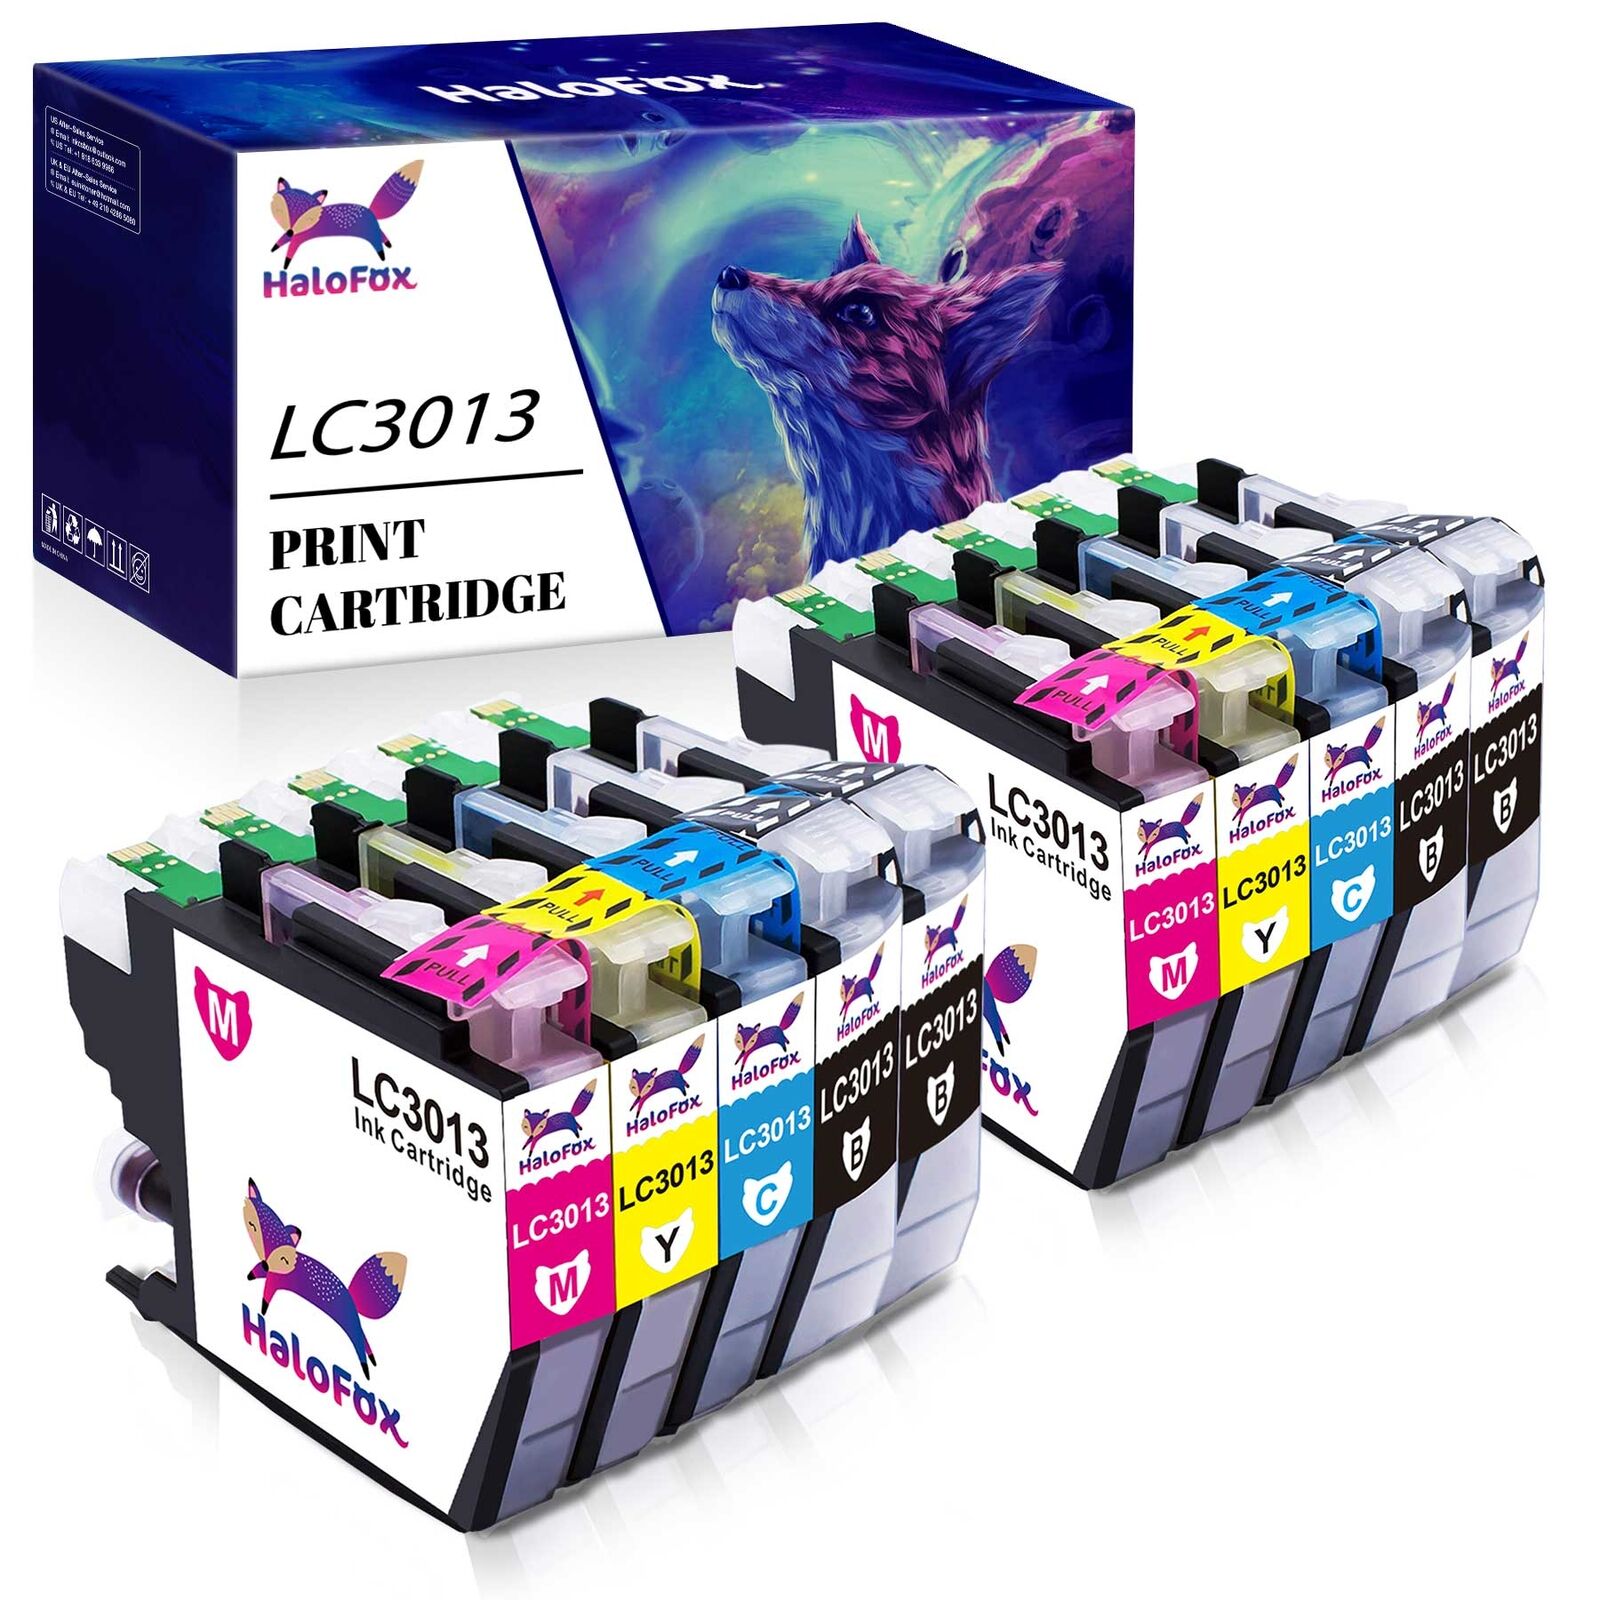 10x Ink Cartridge for Brother LC3013 LC3011 MFC-J491DW J497DW MFC-J690DW Printer